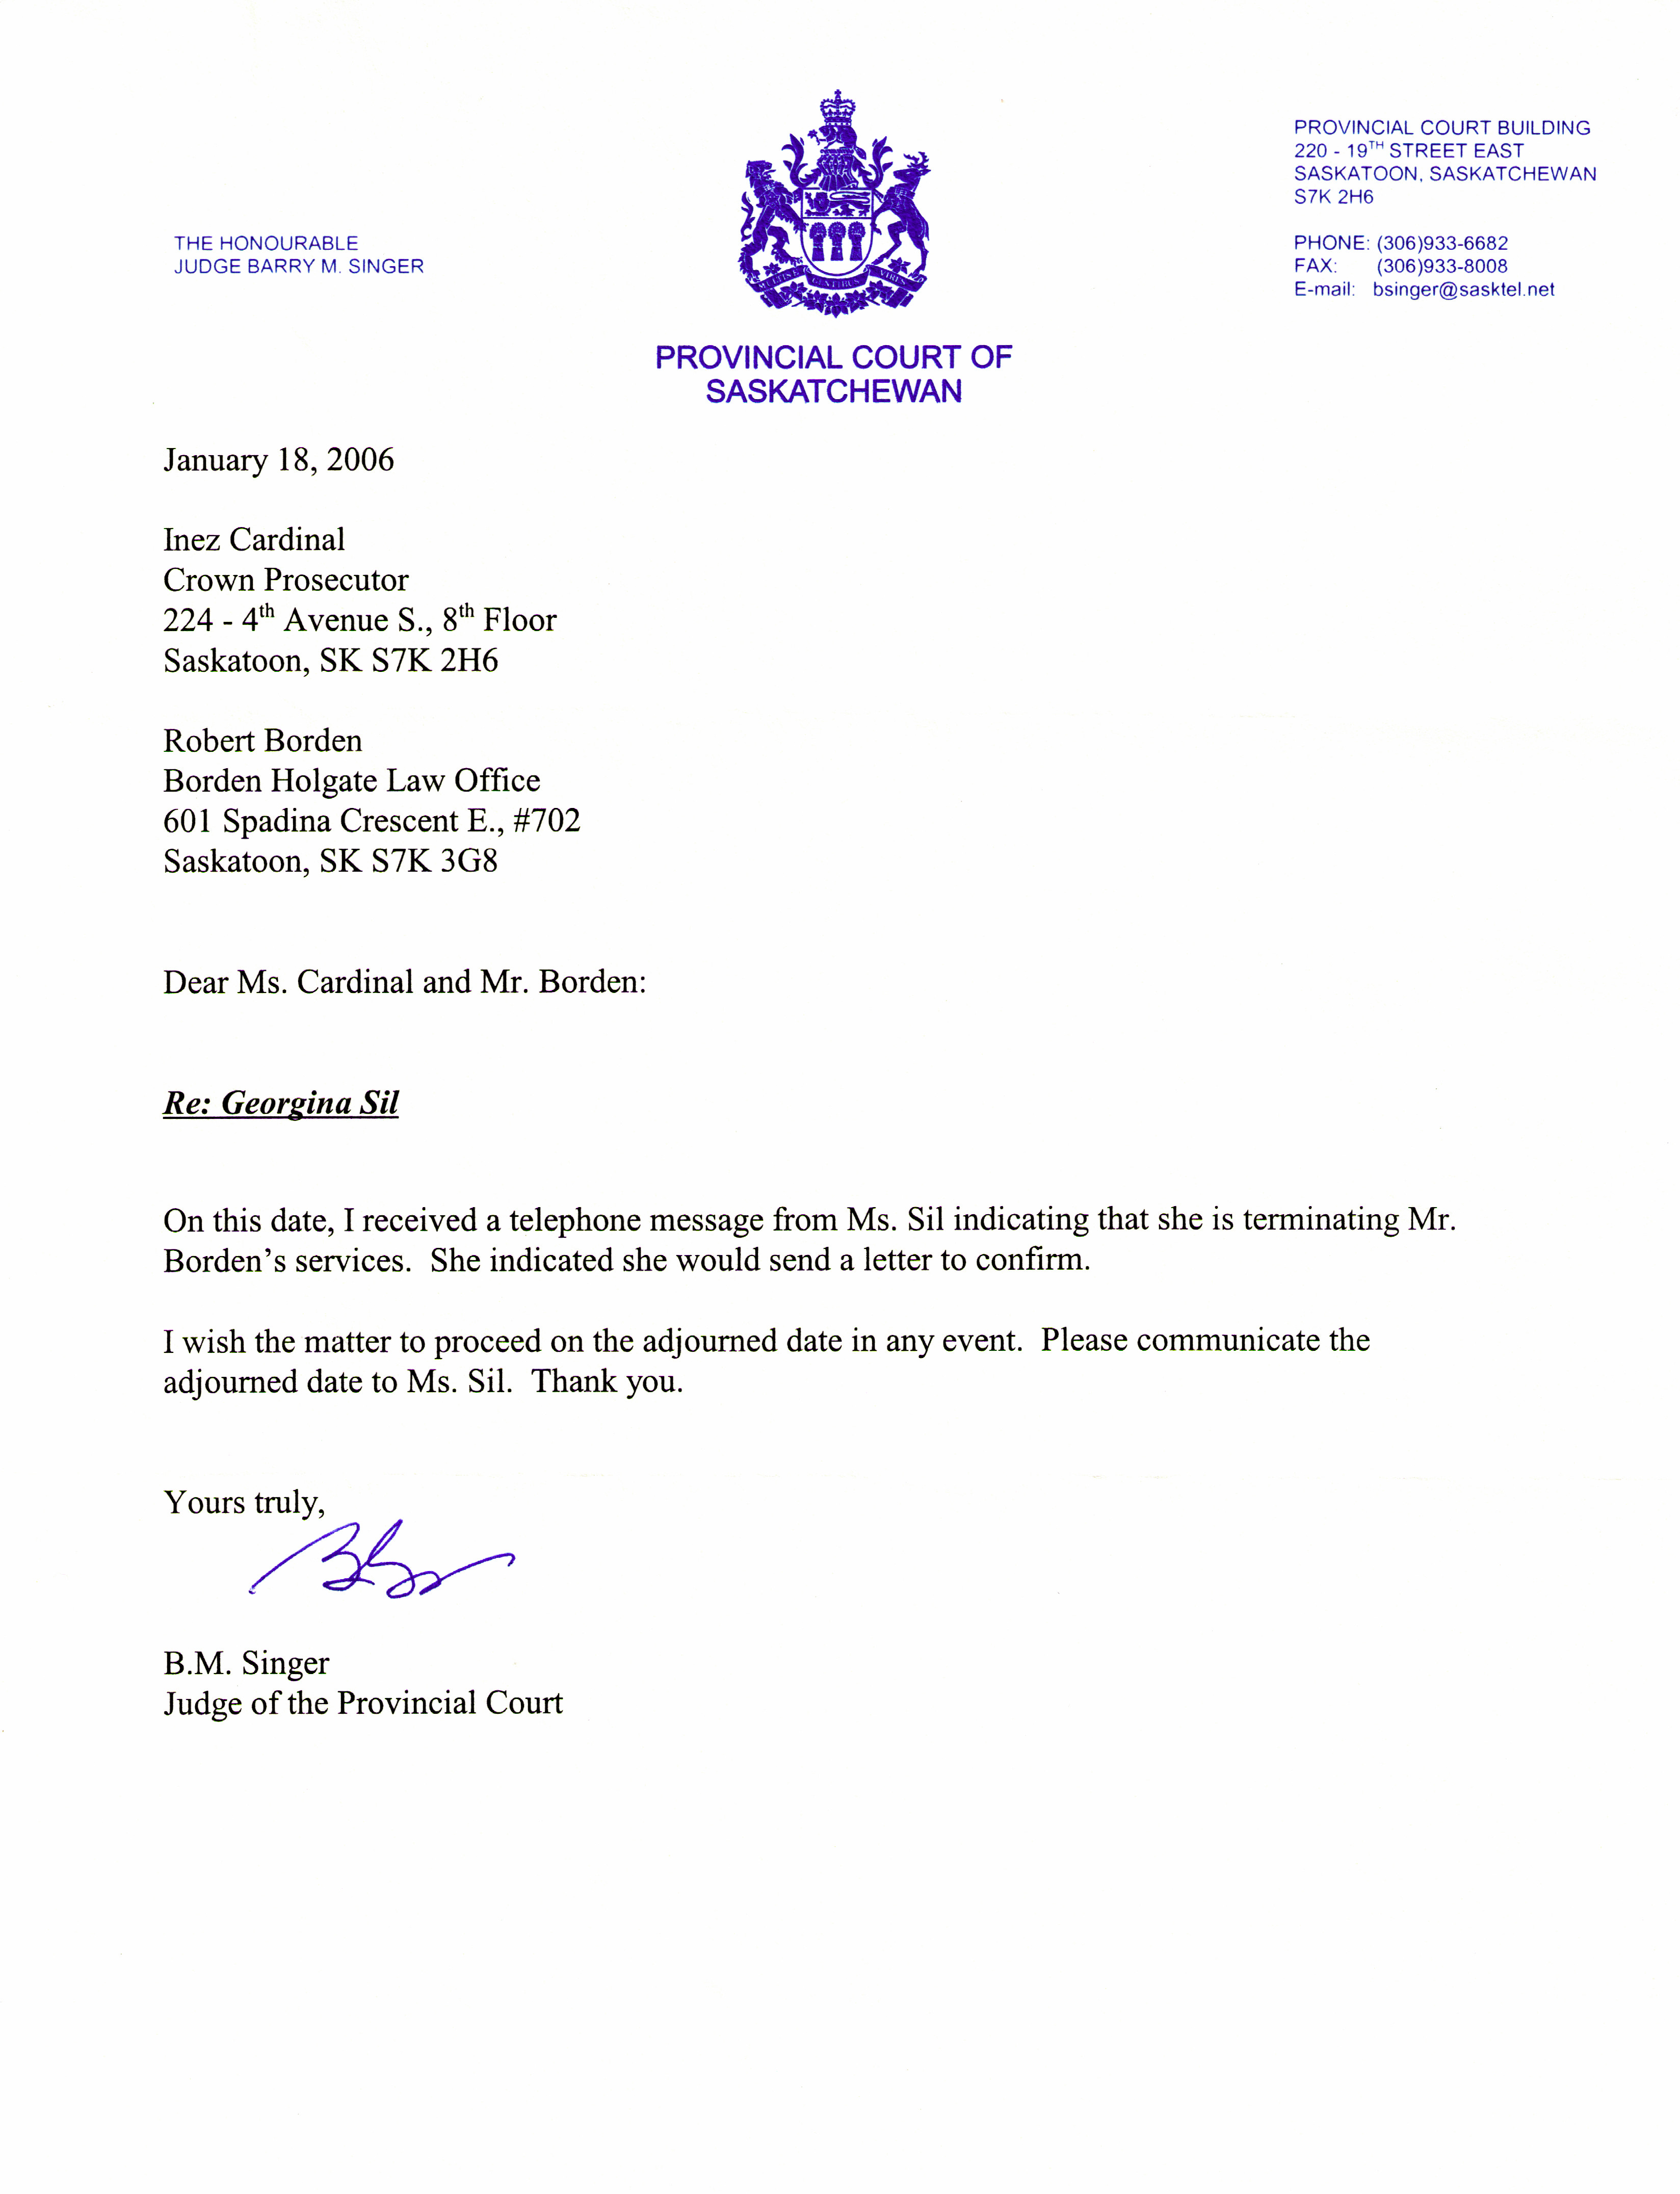 Letter of representation attorney from judge singer fire robert 